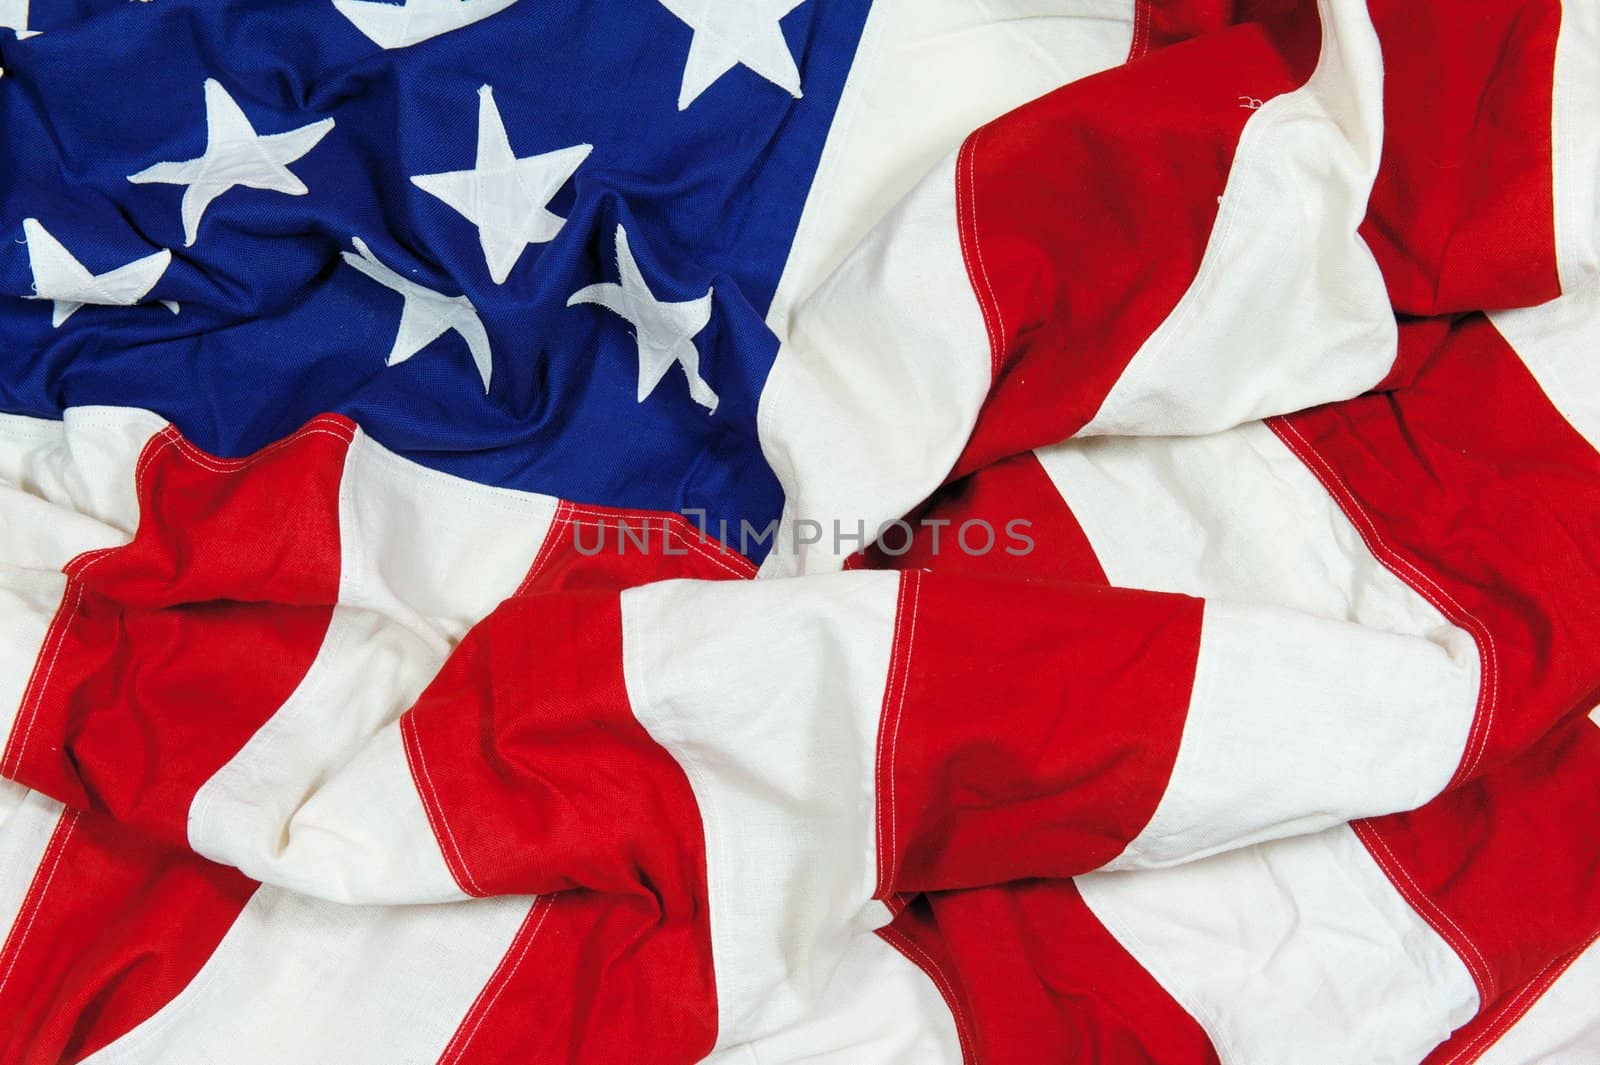 Crumpled and Wrinkled American Flag Background by pixelsnap